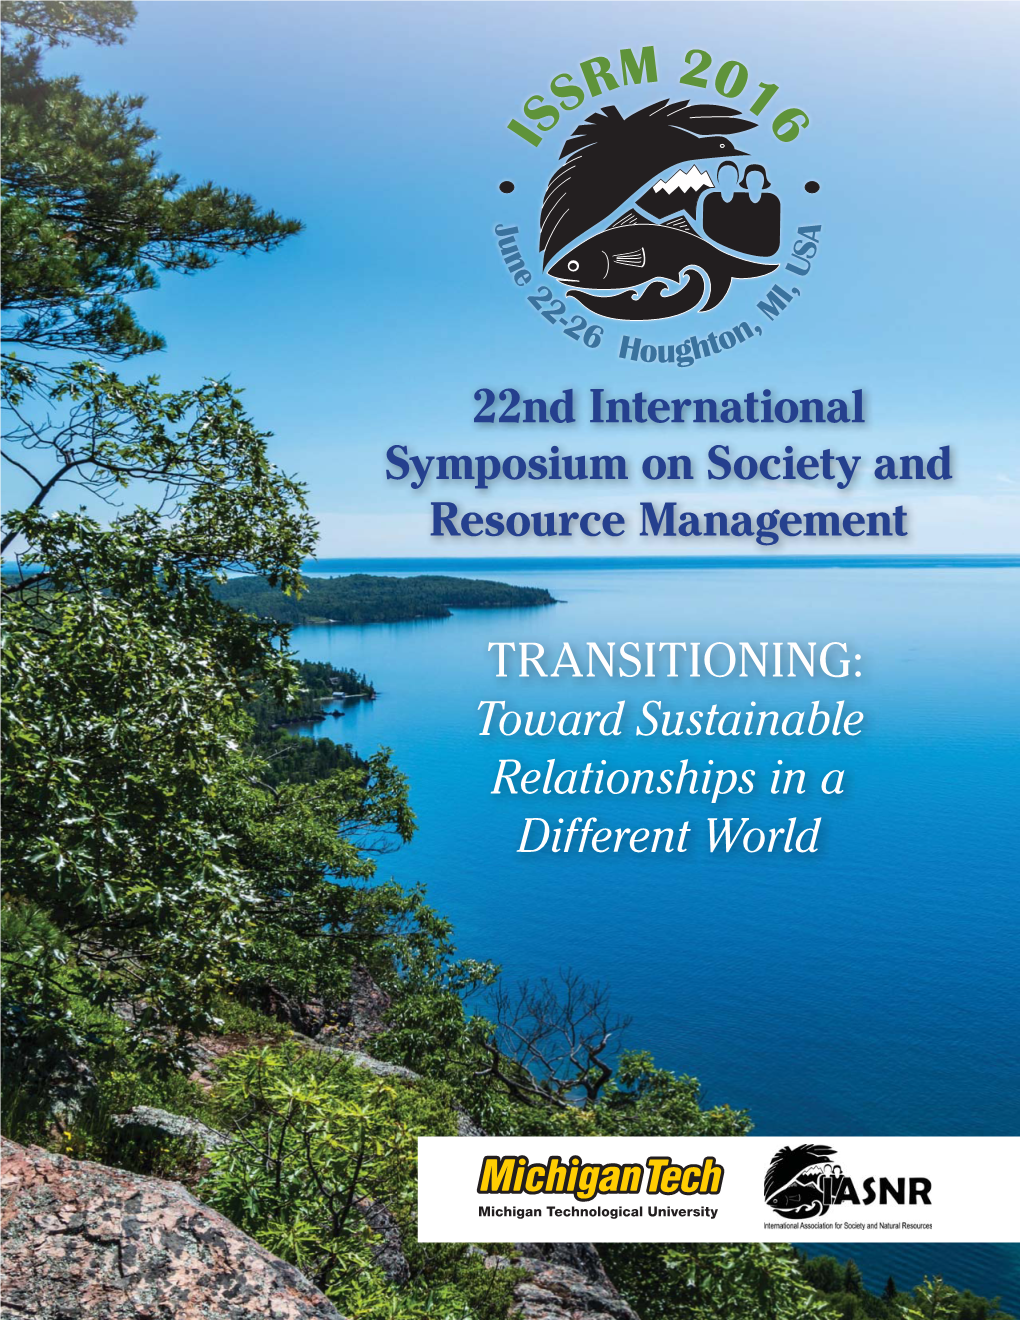 ISSRM 2016 in Houghton, Michigan, USA!